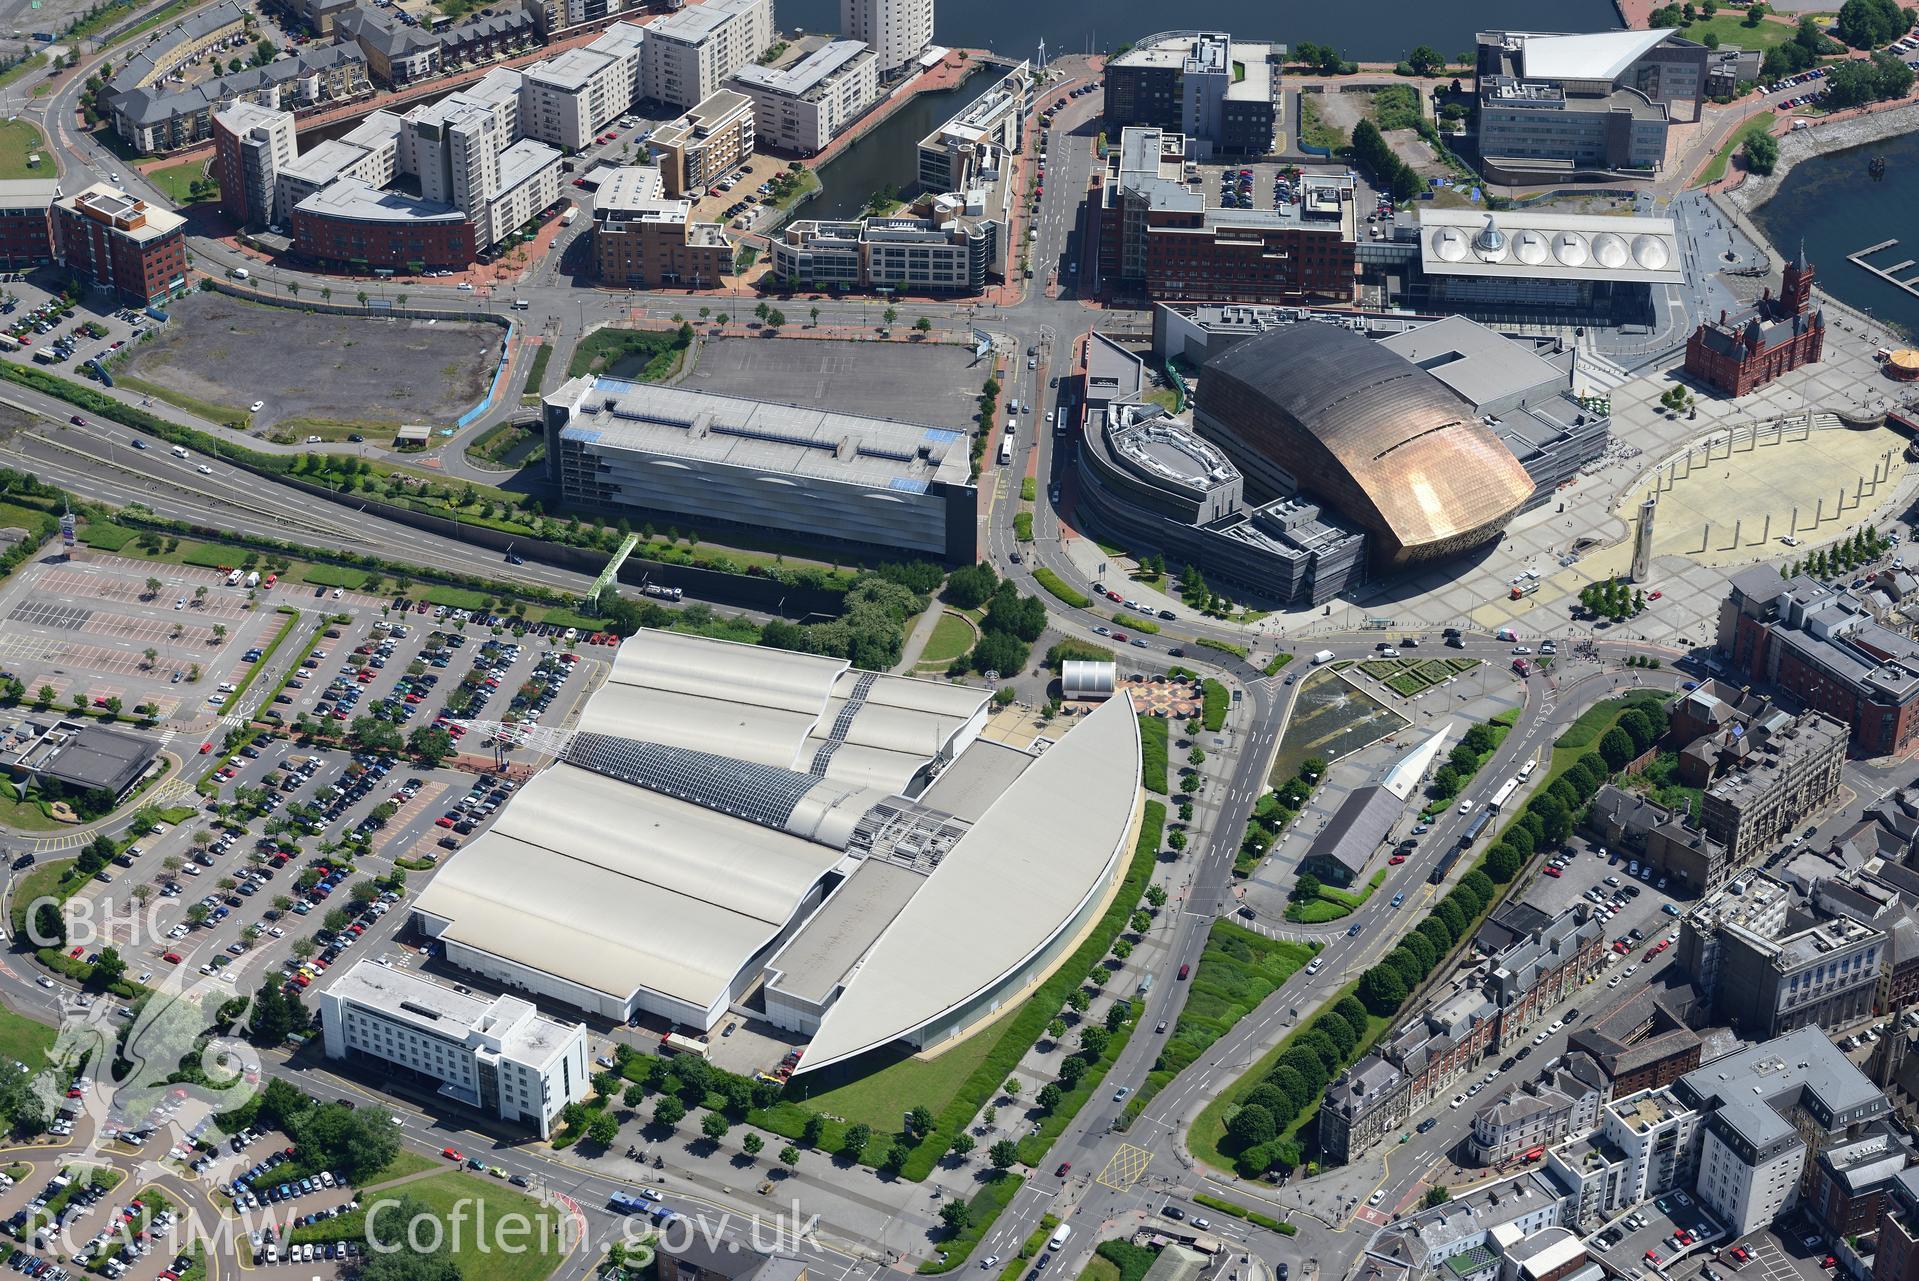 Crickhowell House, the Pierhead Building, Senedd Assembly Building; Wales Millennium Centre and the Red Dragon Centre, Cardiff Bay. Oblique aerial photograph taken during the Royal Commission's programme of archaeological aerial reconnaissance by Toby Driver on 29th June 2015.